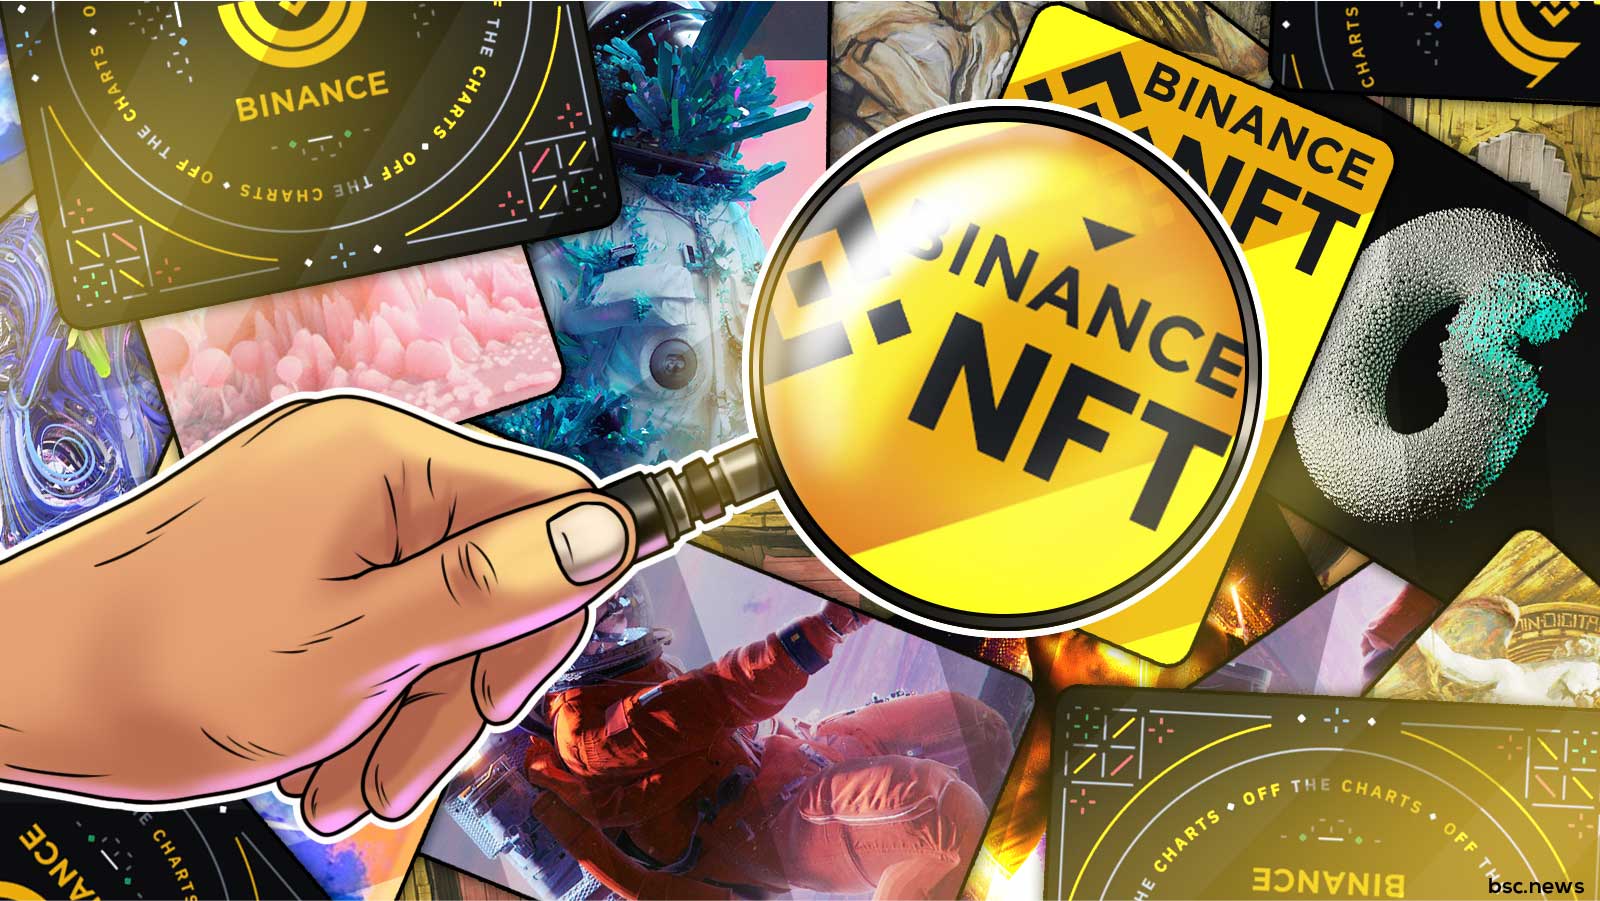 How to Buy and Sell NFTs: NFT Binance Marketplace